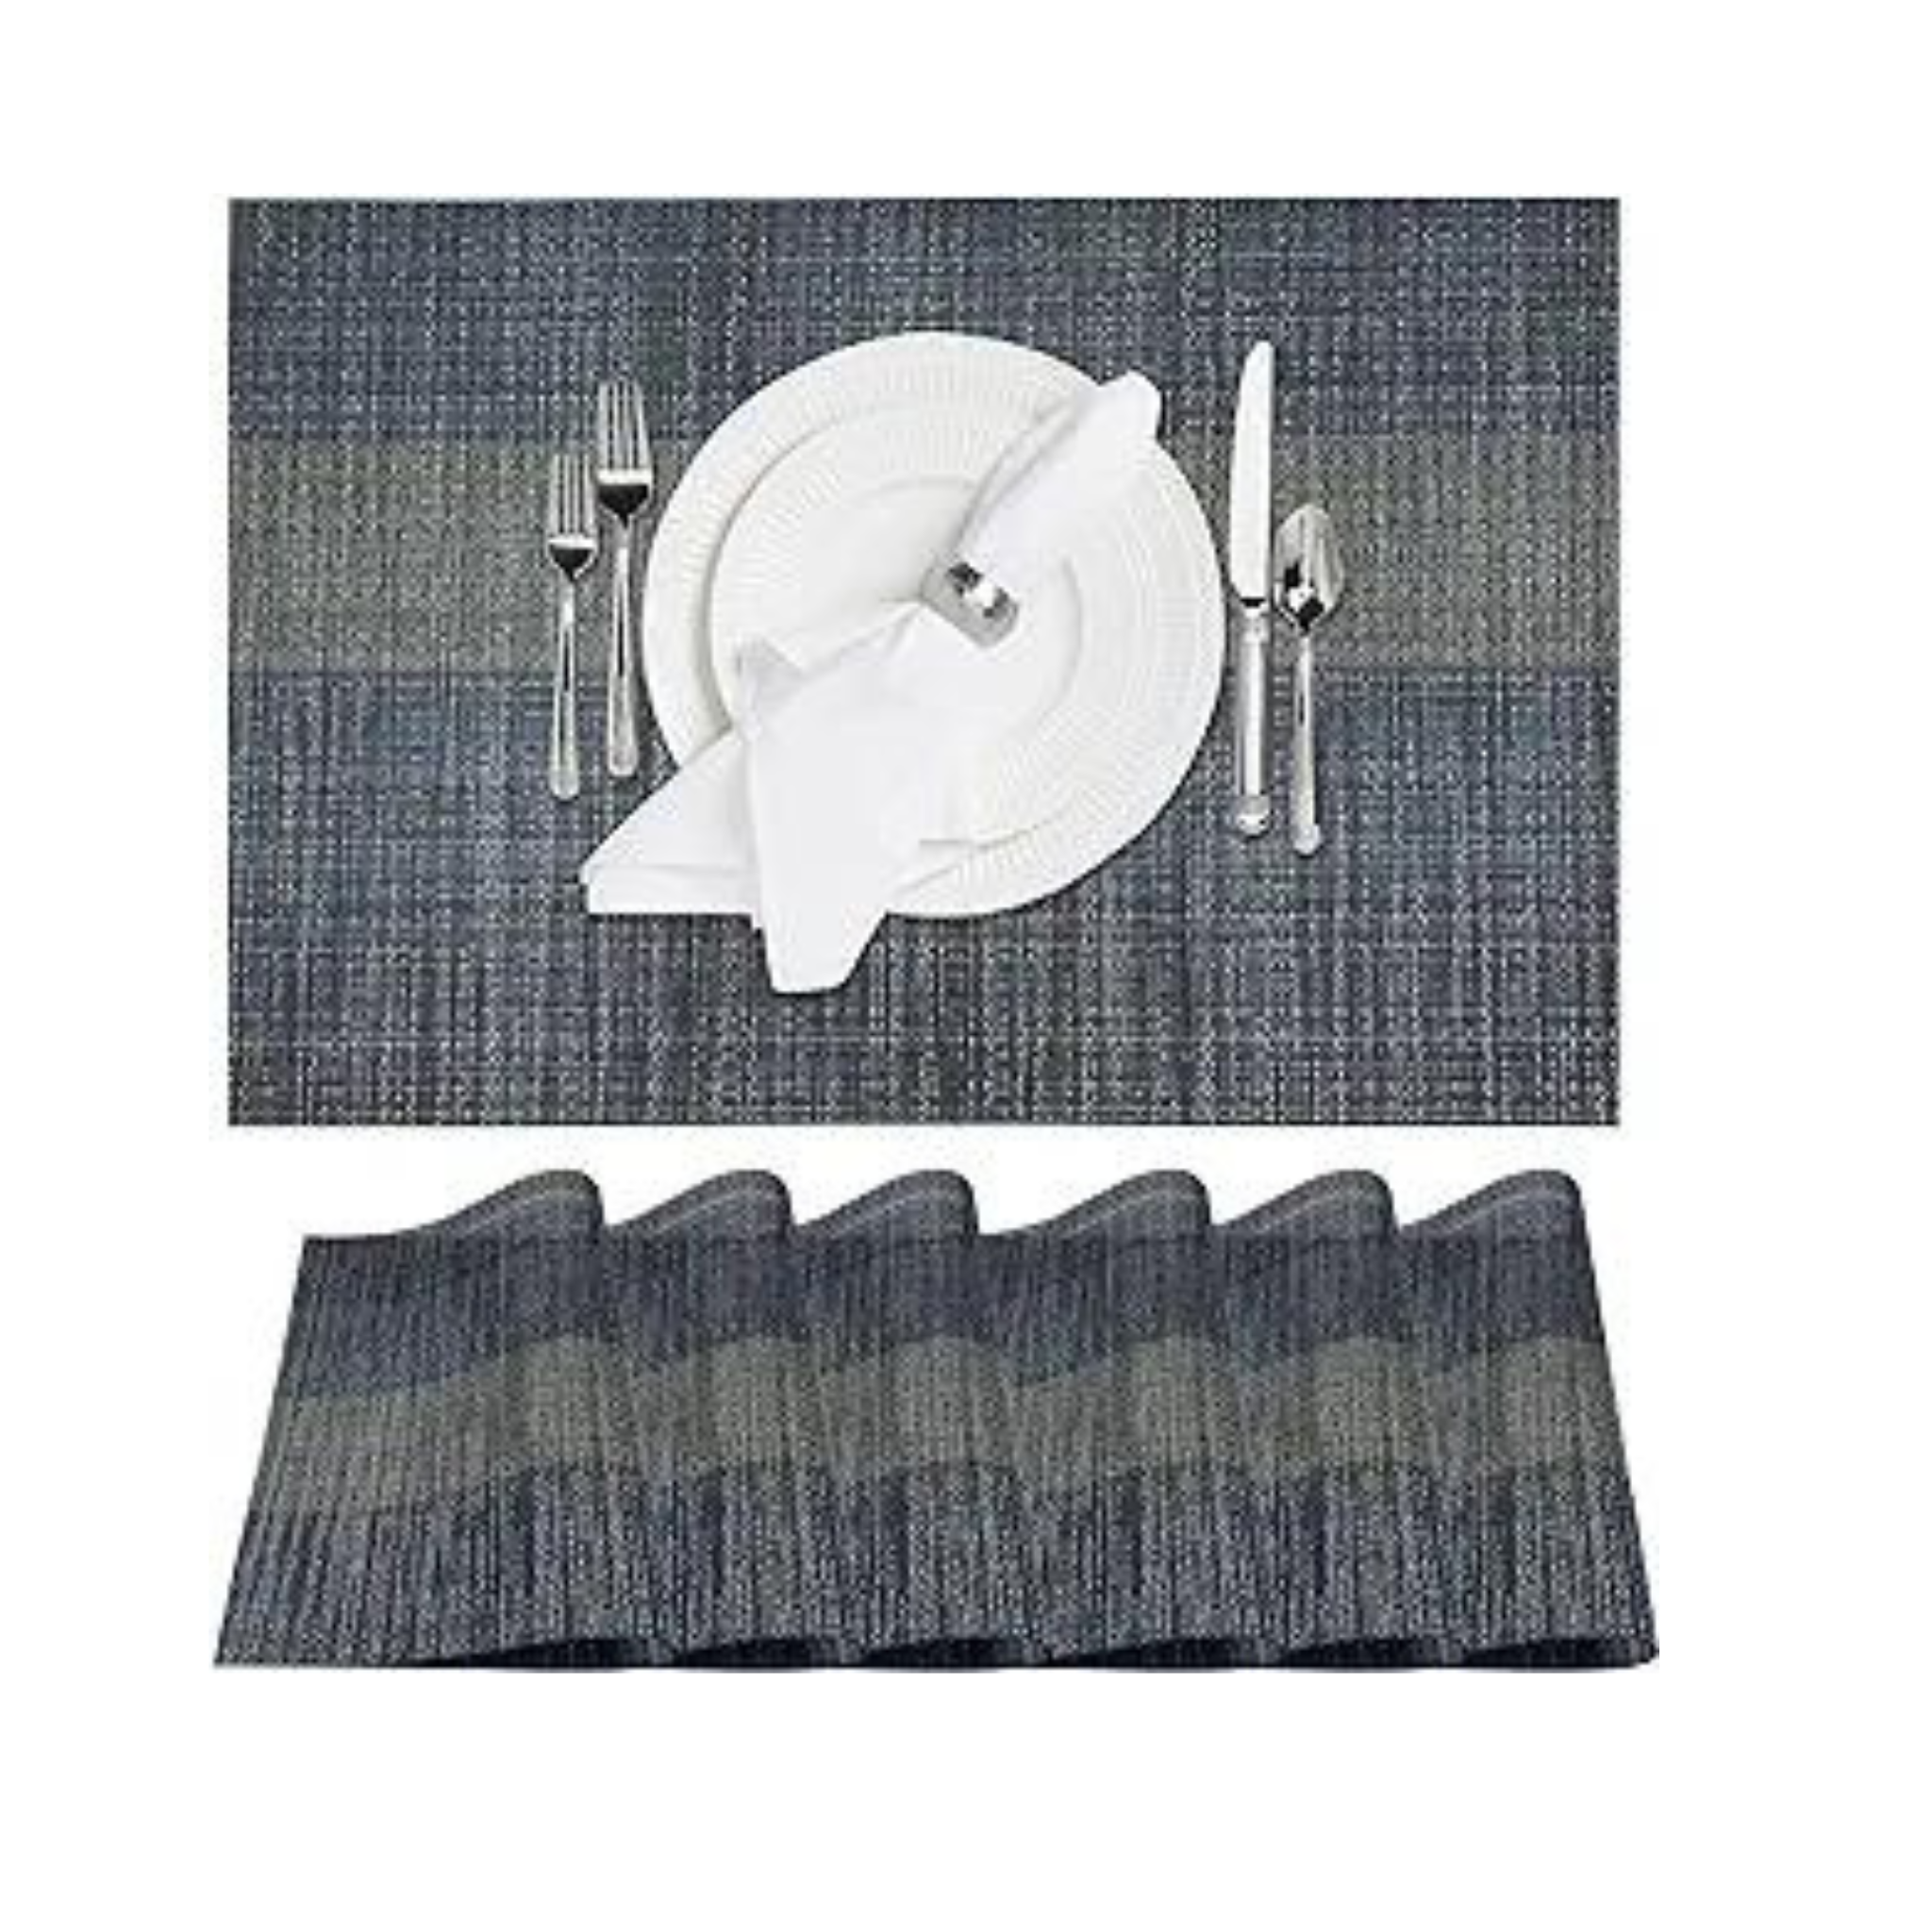 Set of 6 Non-Slip Table Placemats